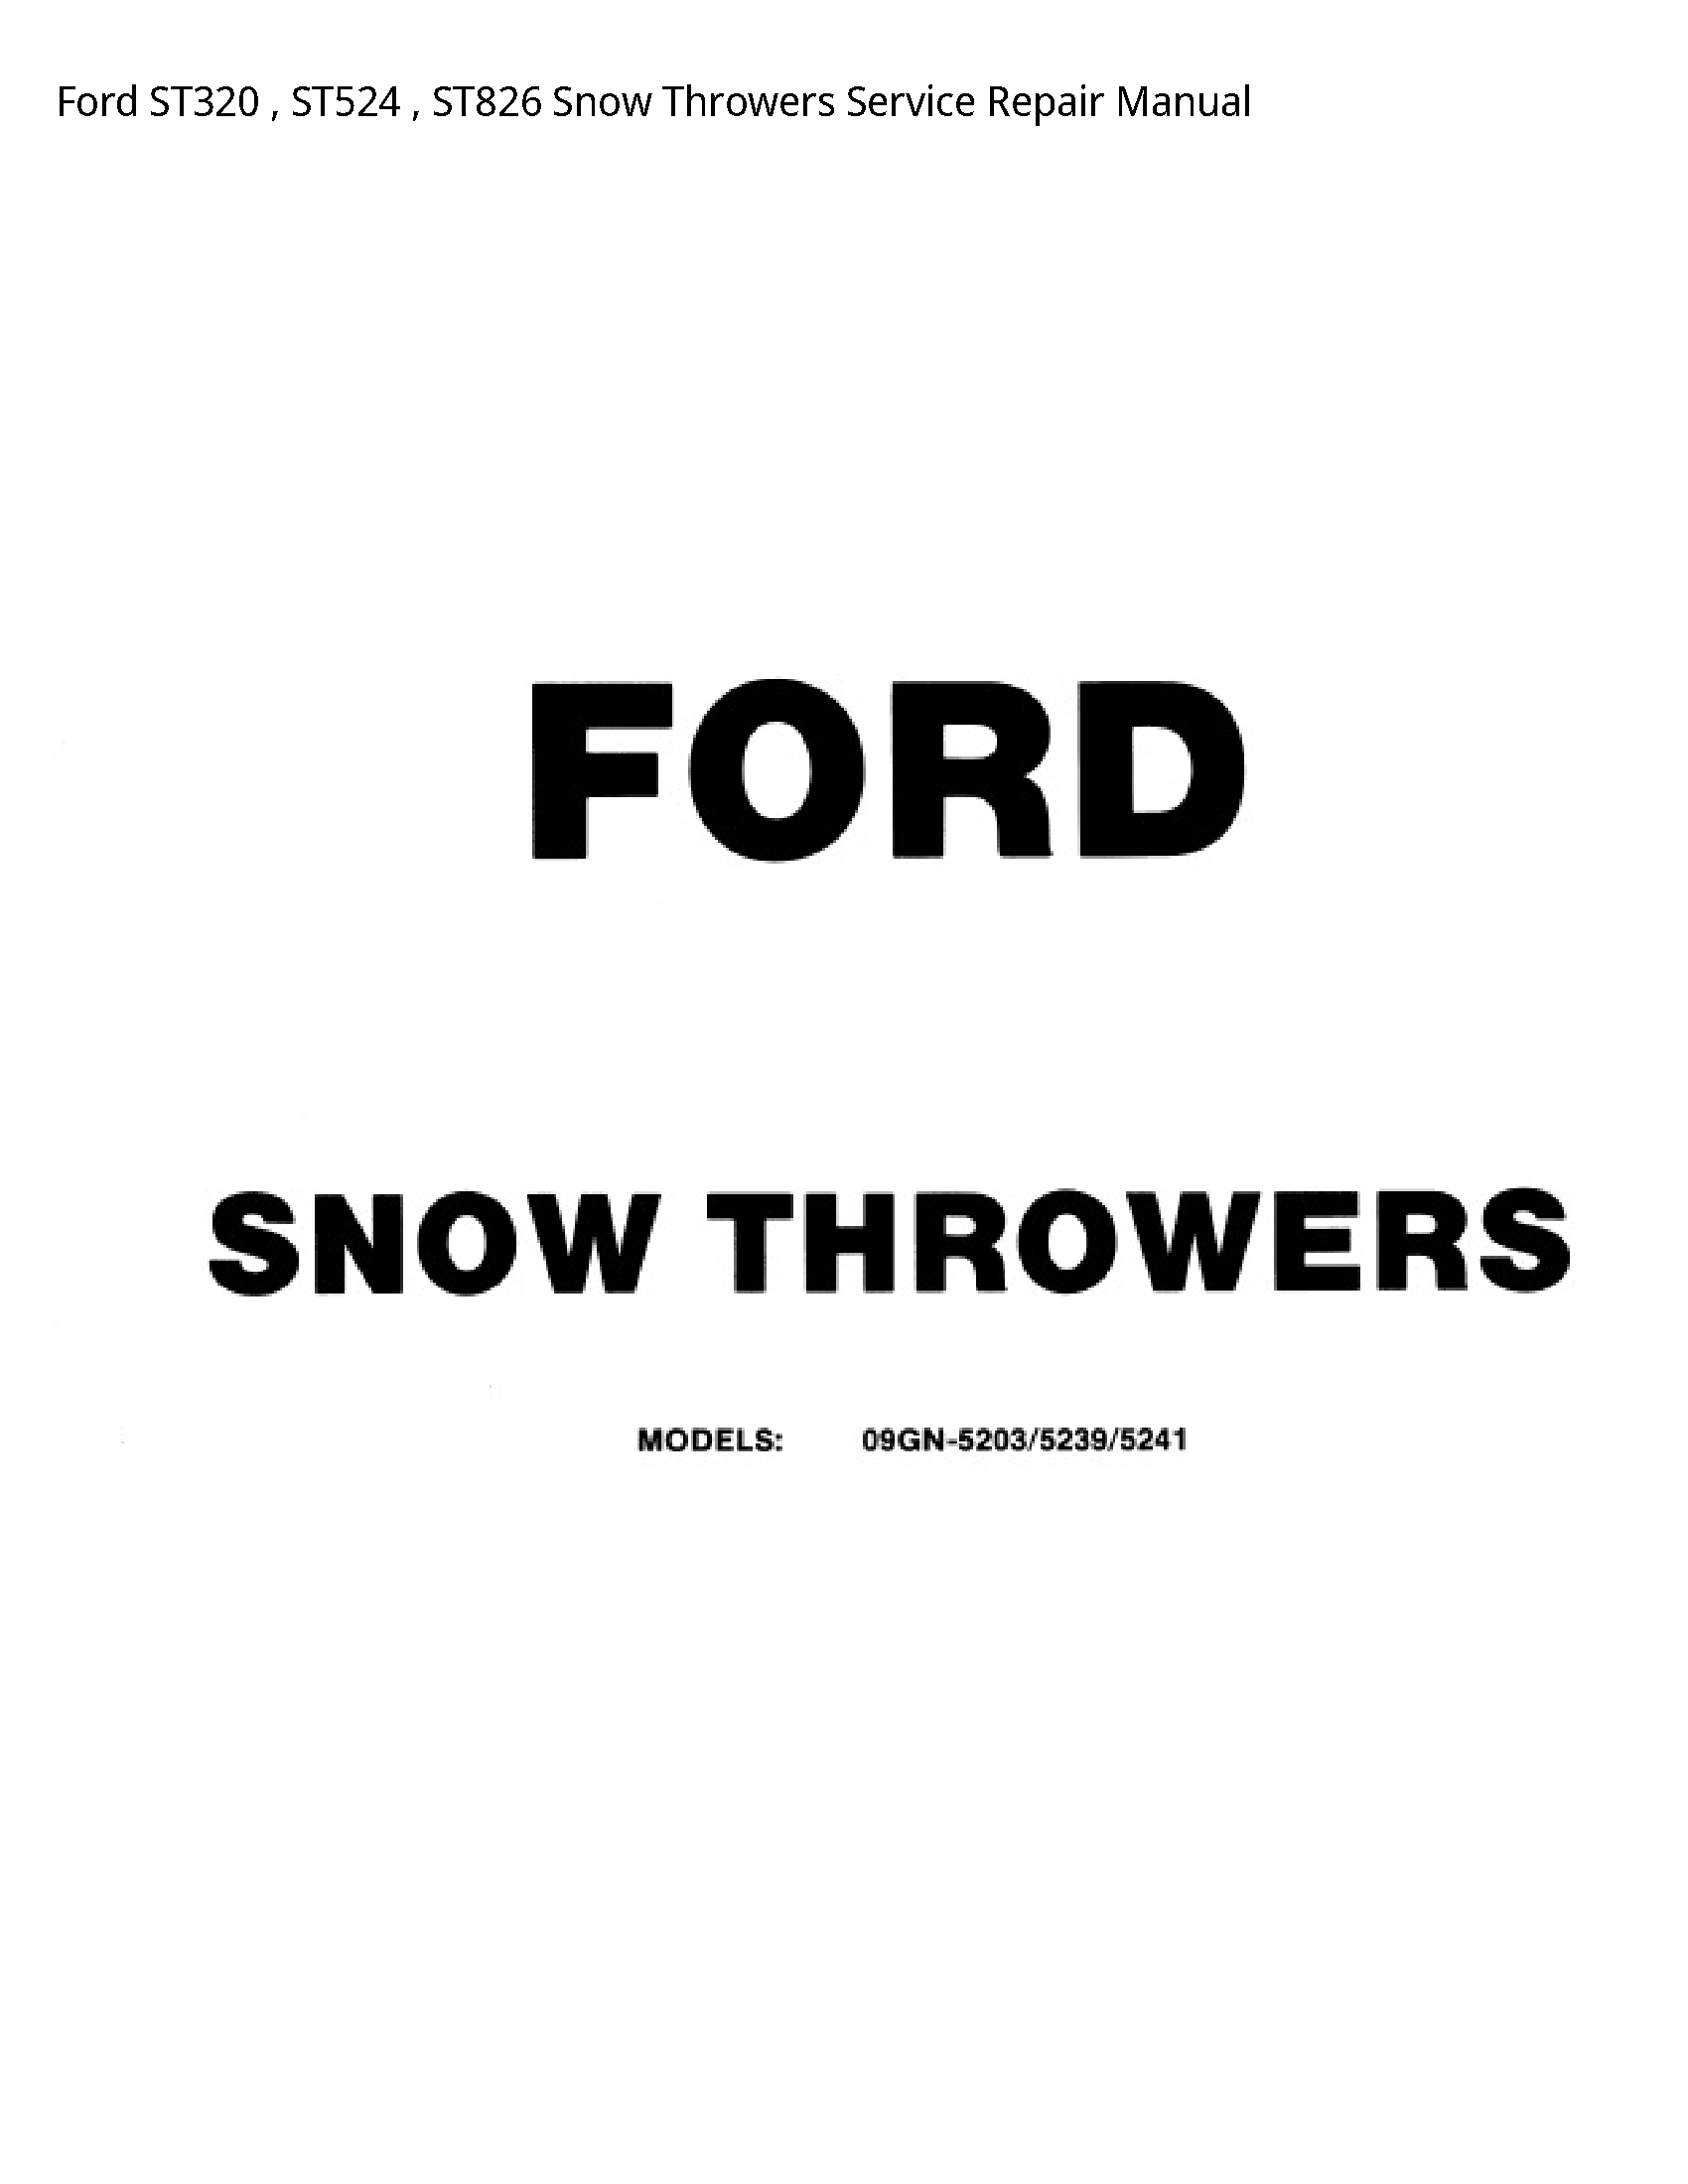 Ford ST320 Snow Throwers manual